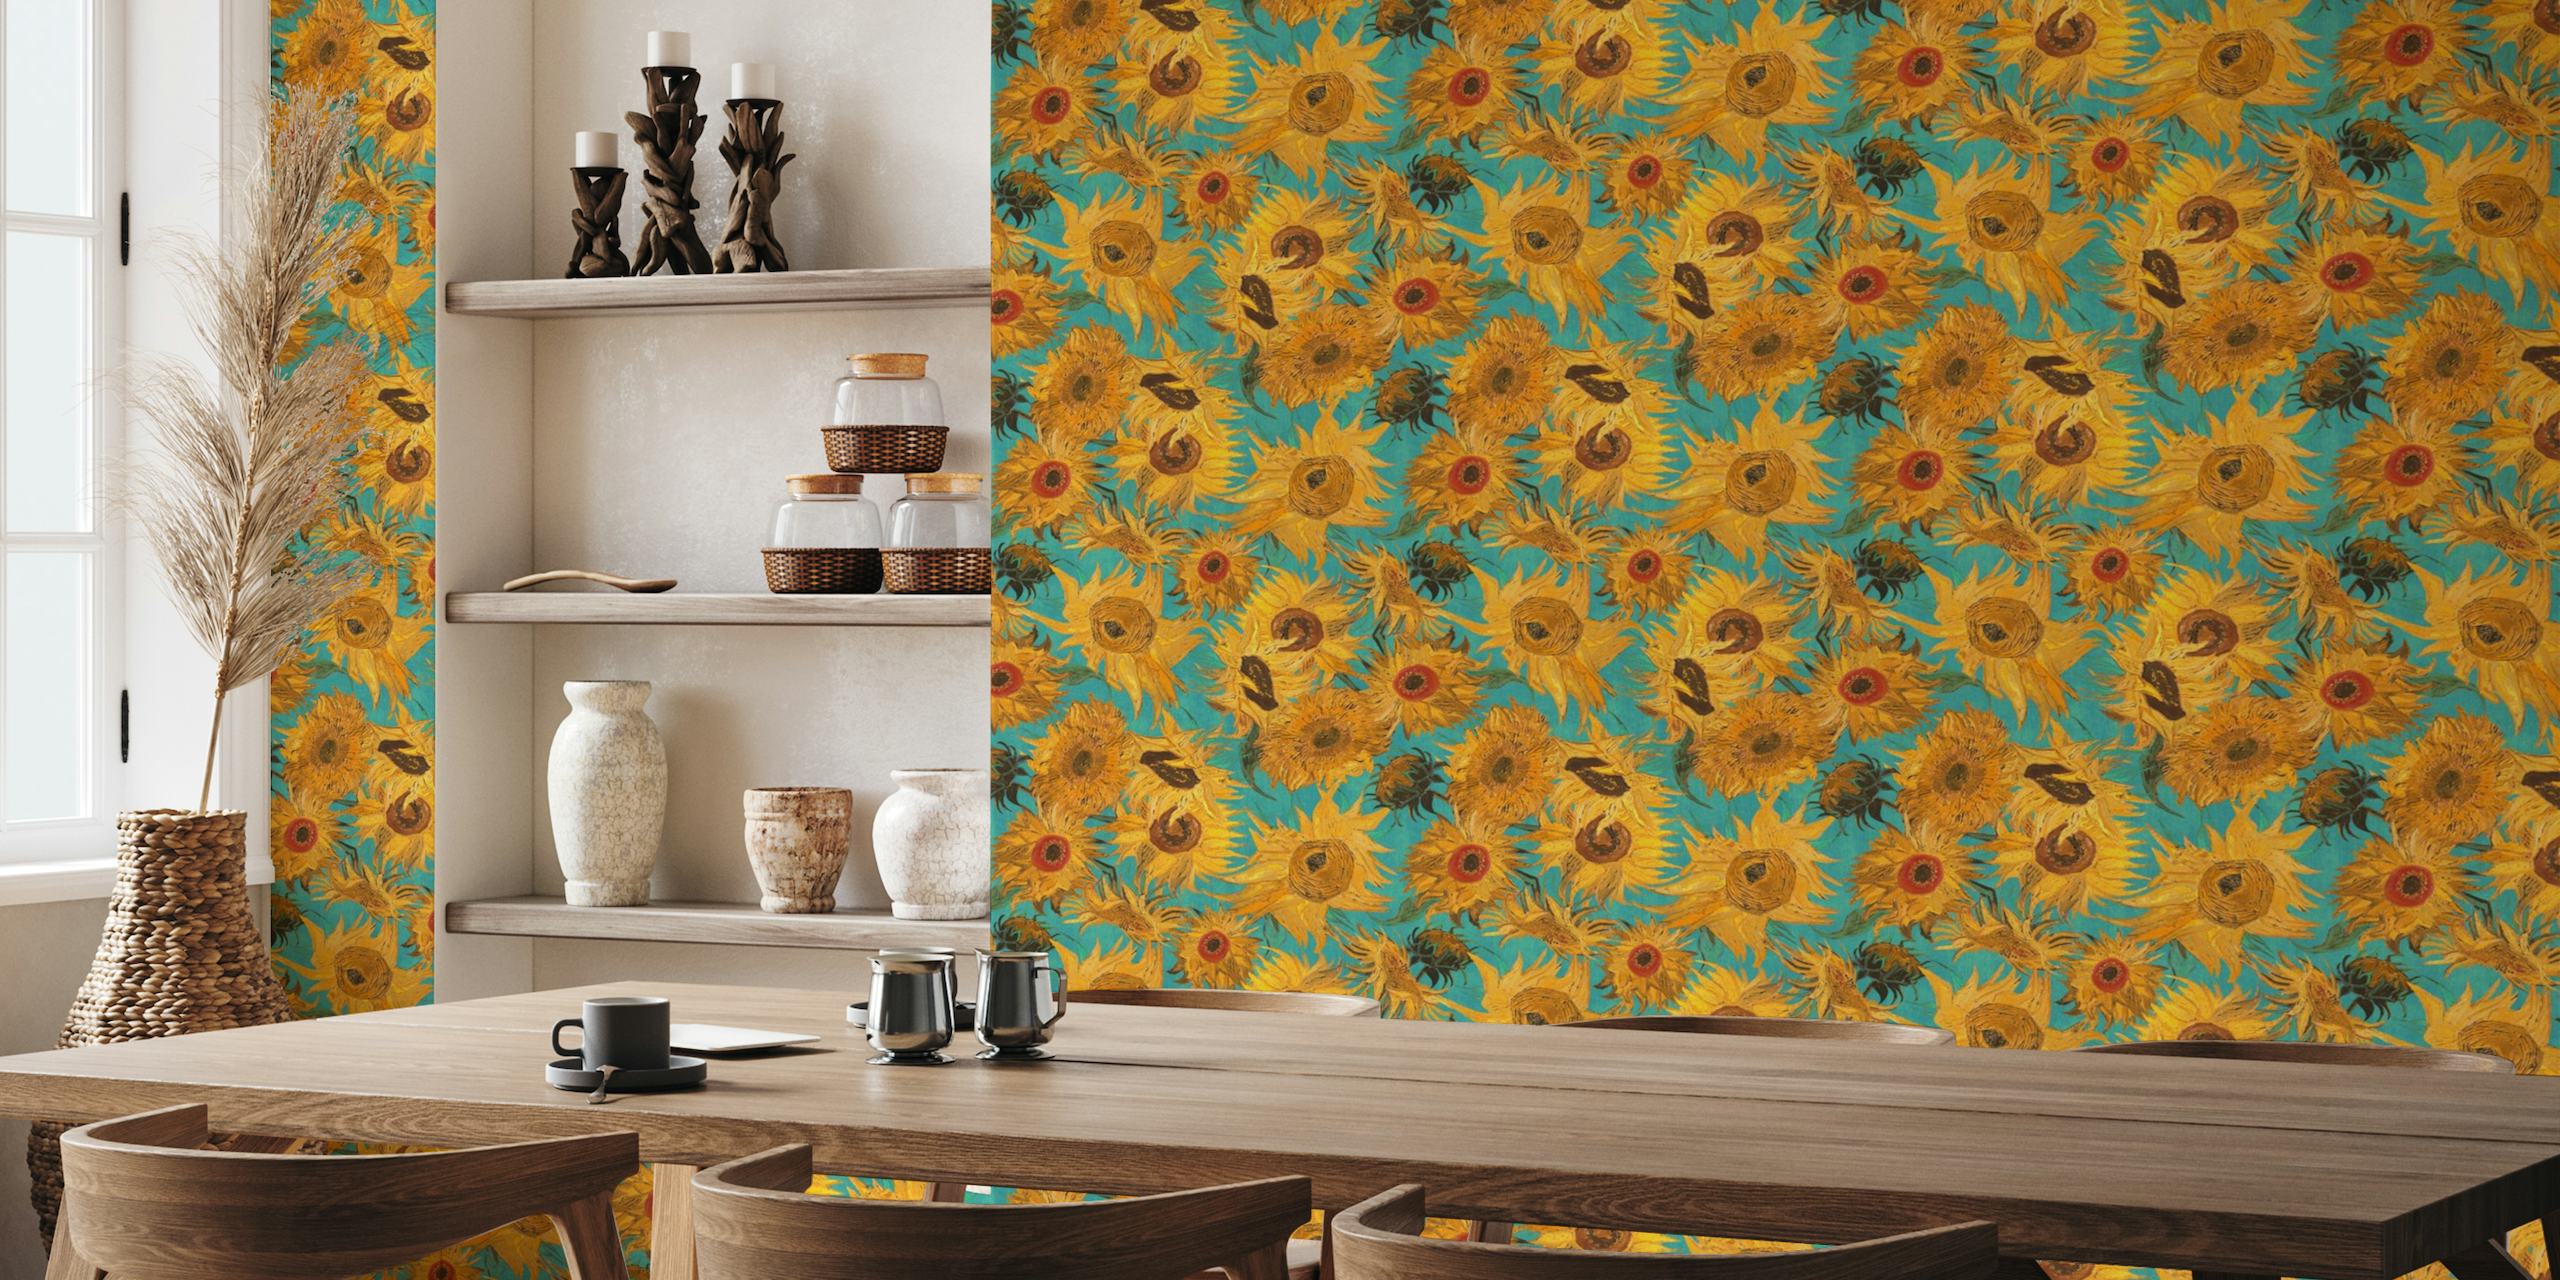 Van Gogh Sunflowers Pattern in yellow, teal, green, ochre and red papiers peint